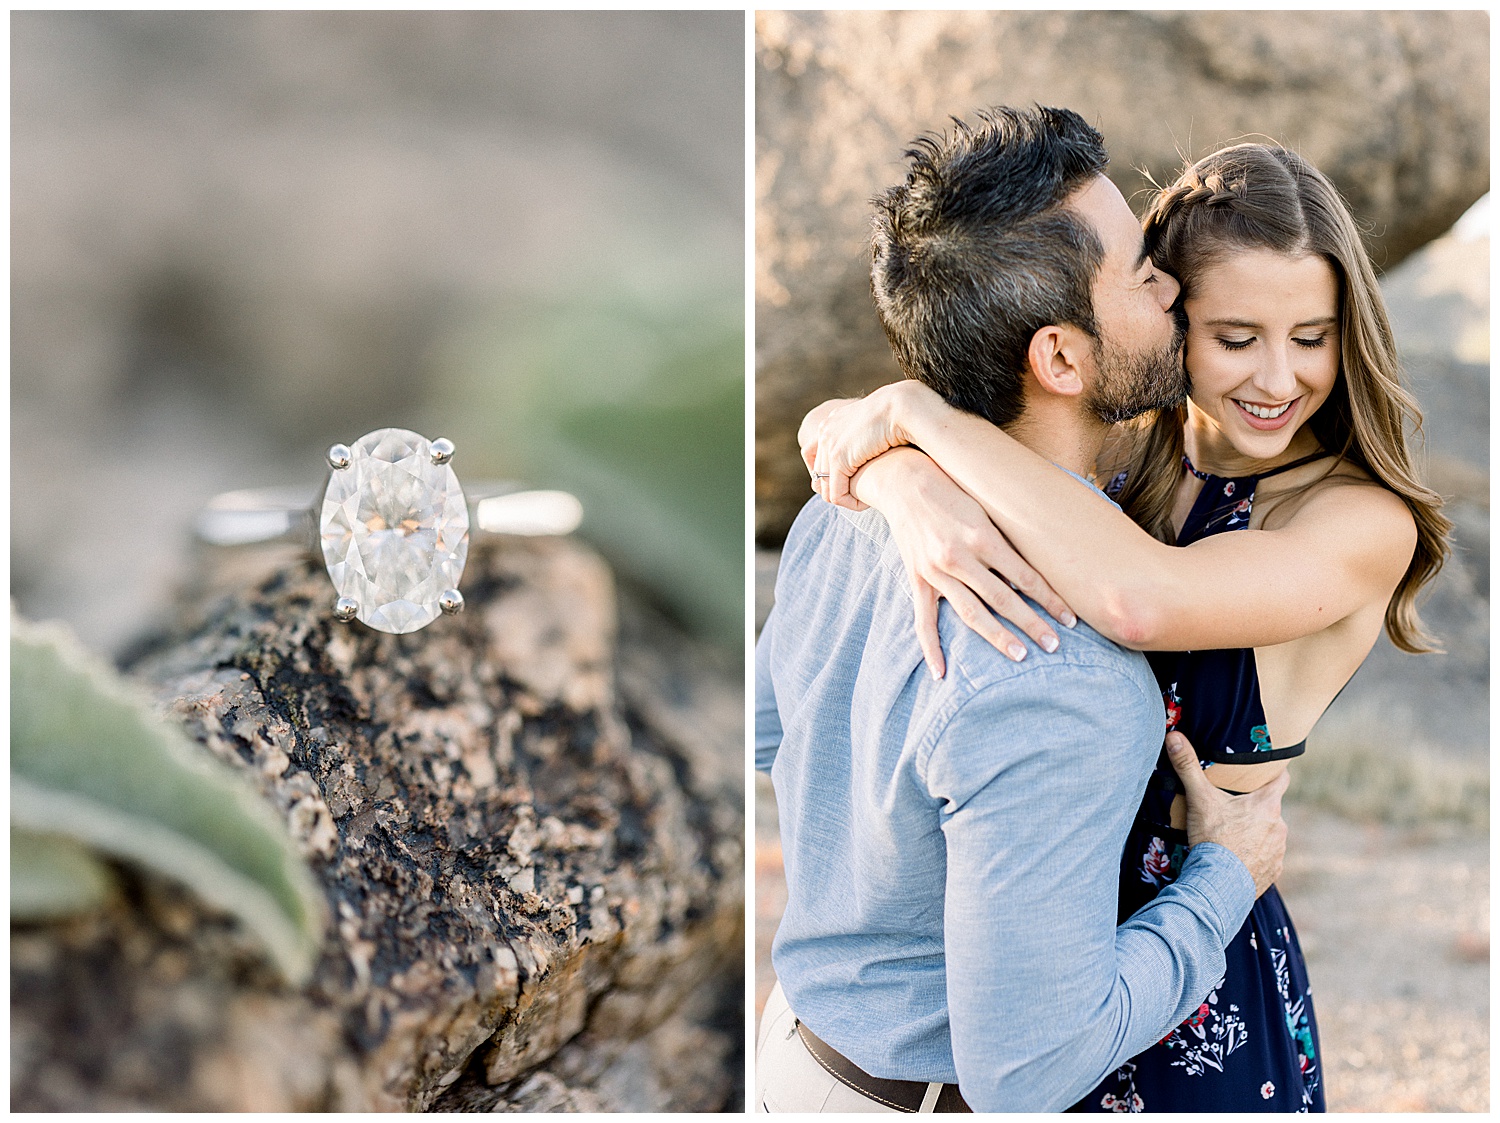 Ring Detail of Engagement ring in Desert of North Scottsdale Engagement Session